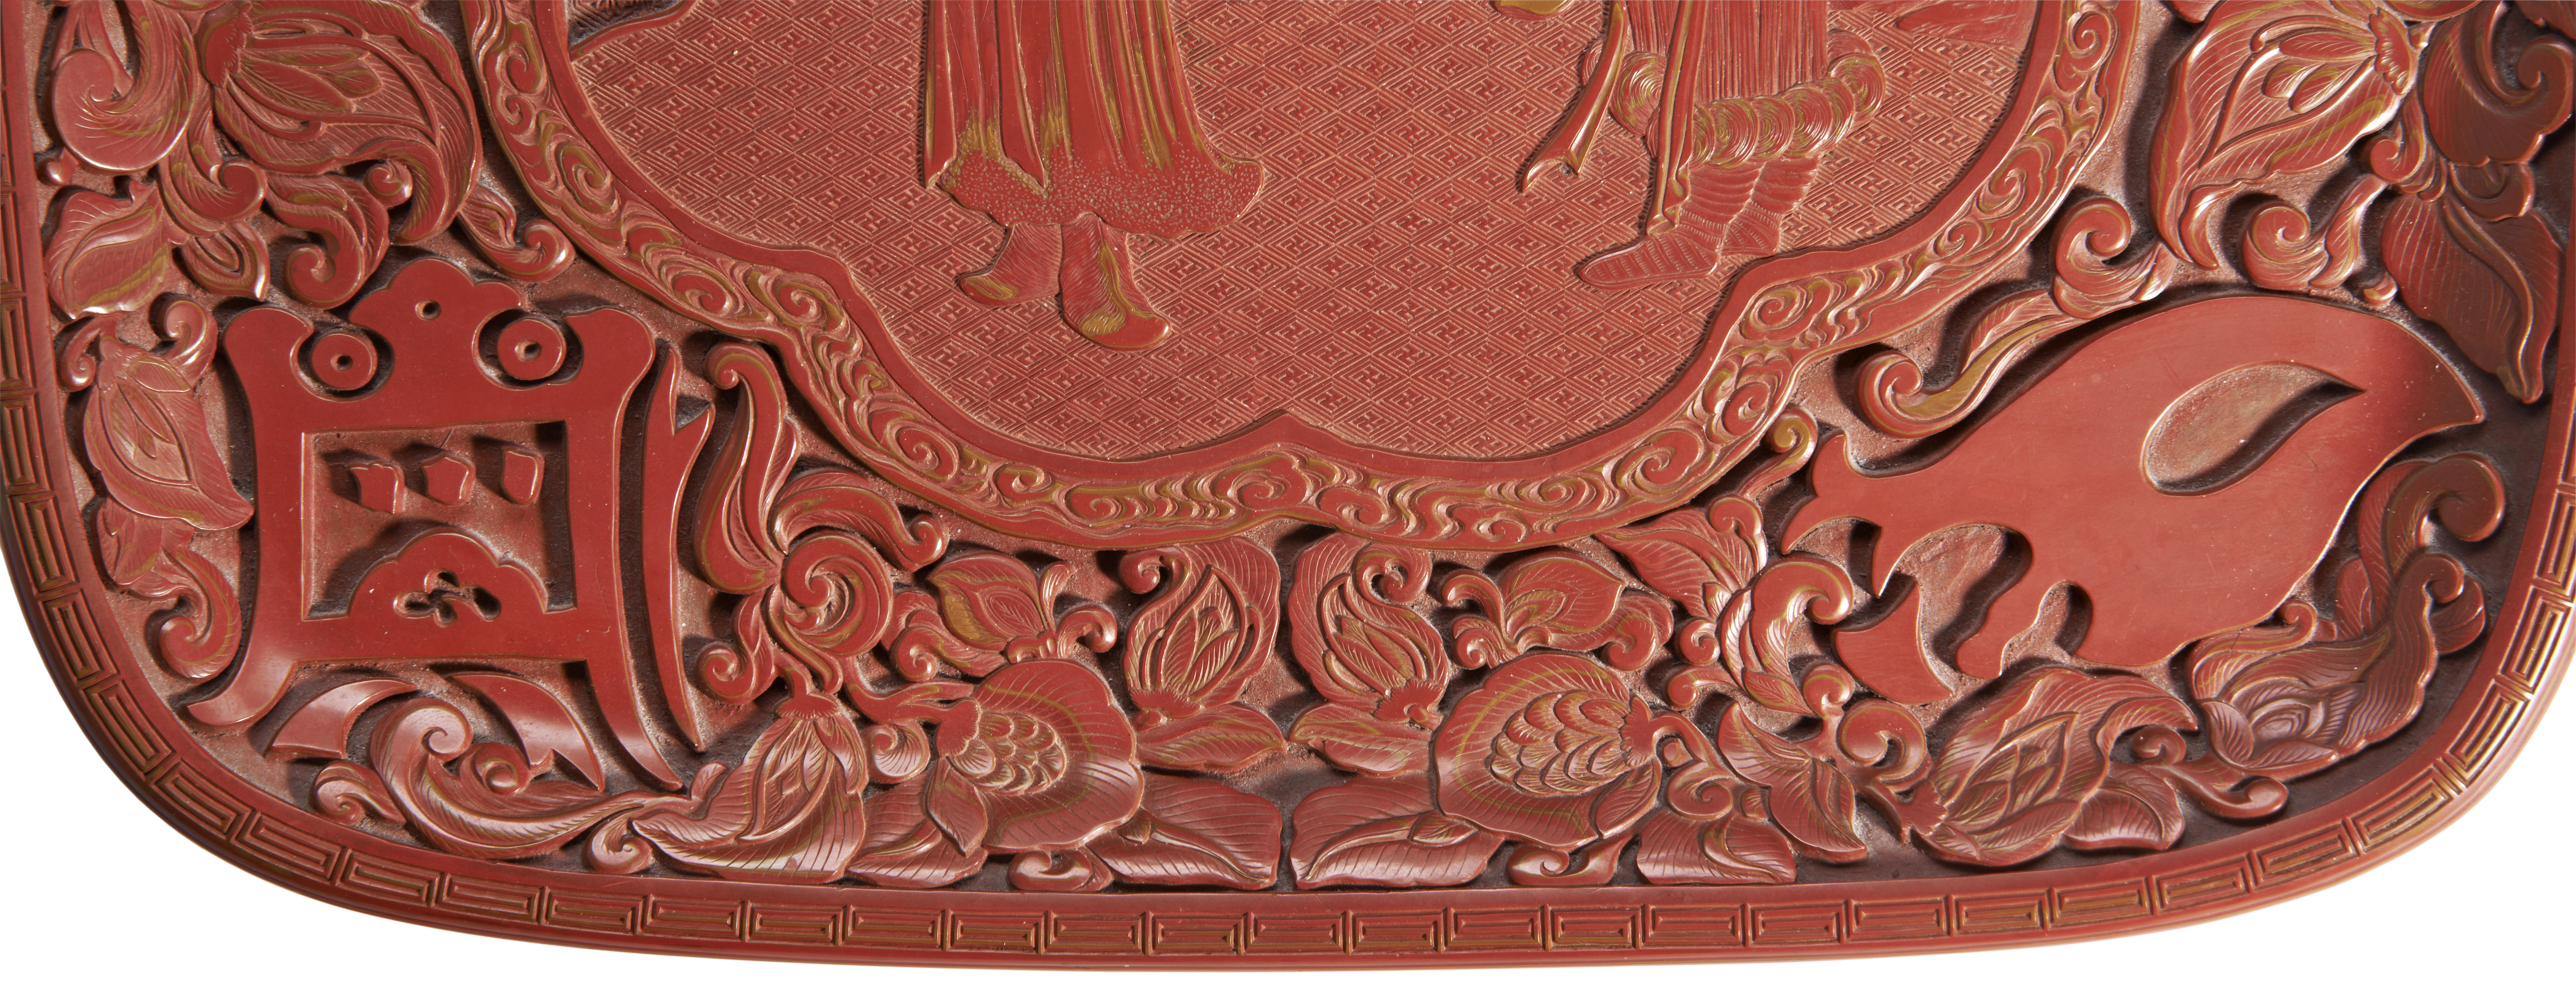 A FINE CINNABAR LACQUER DISH QIANLONG PERIOD (1736-1795) 清 剔红方形漆盘 red square carved - Image 5 of 6